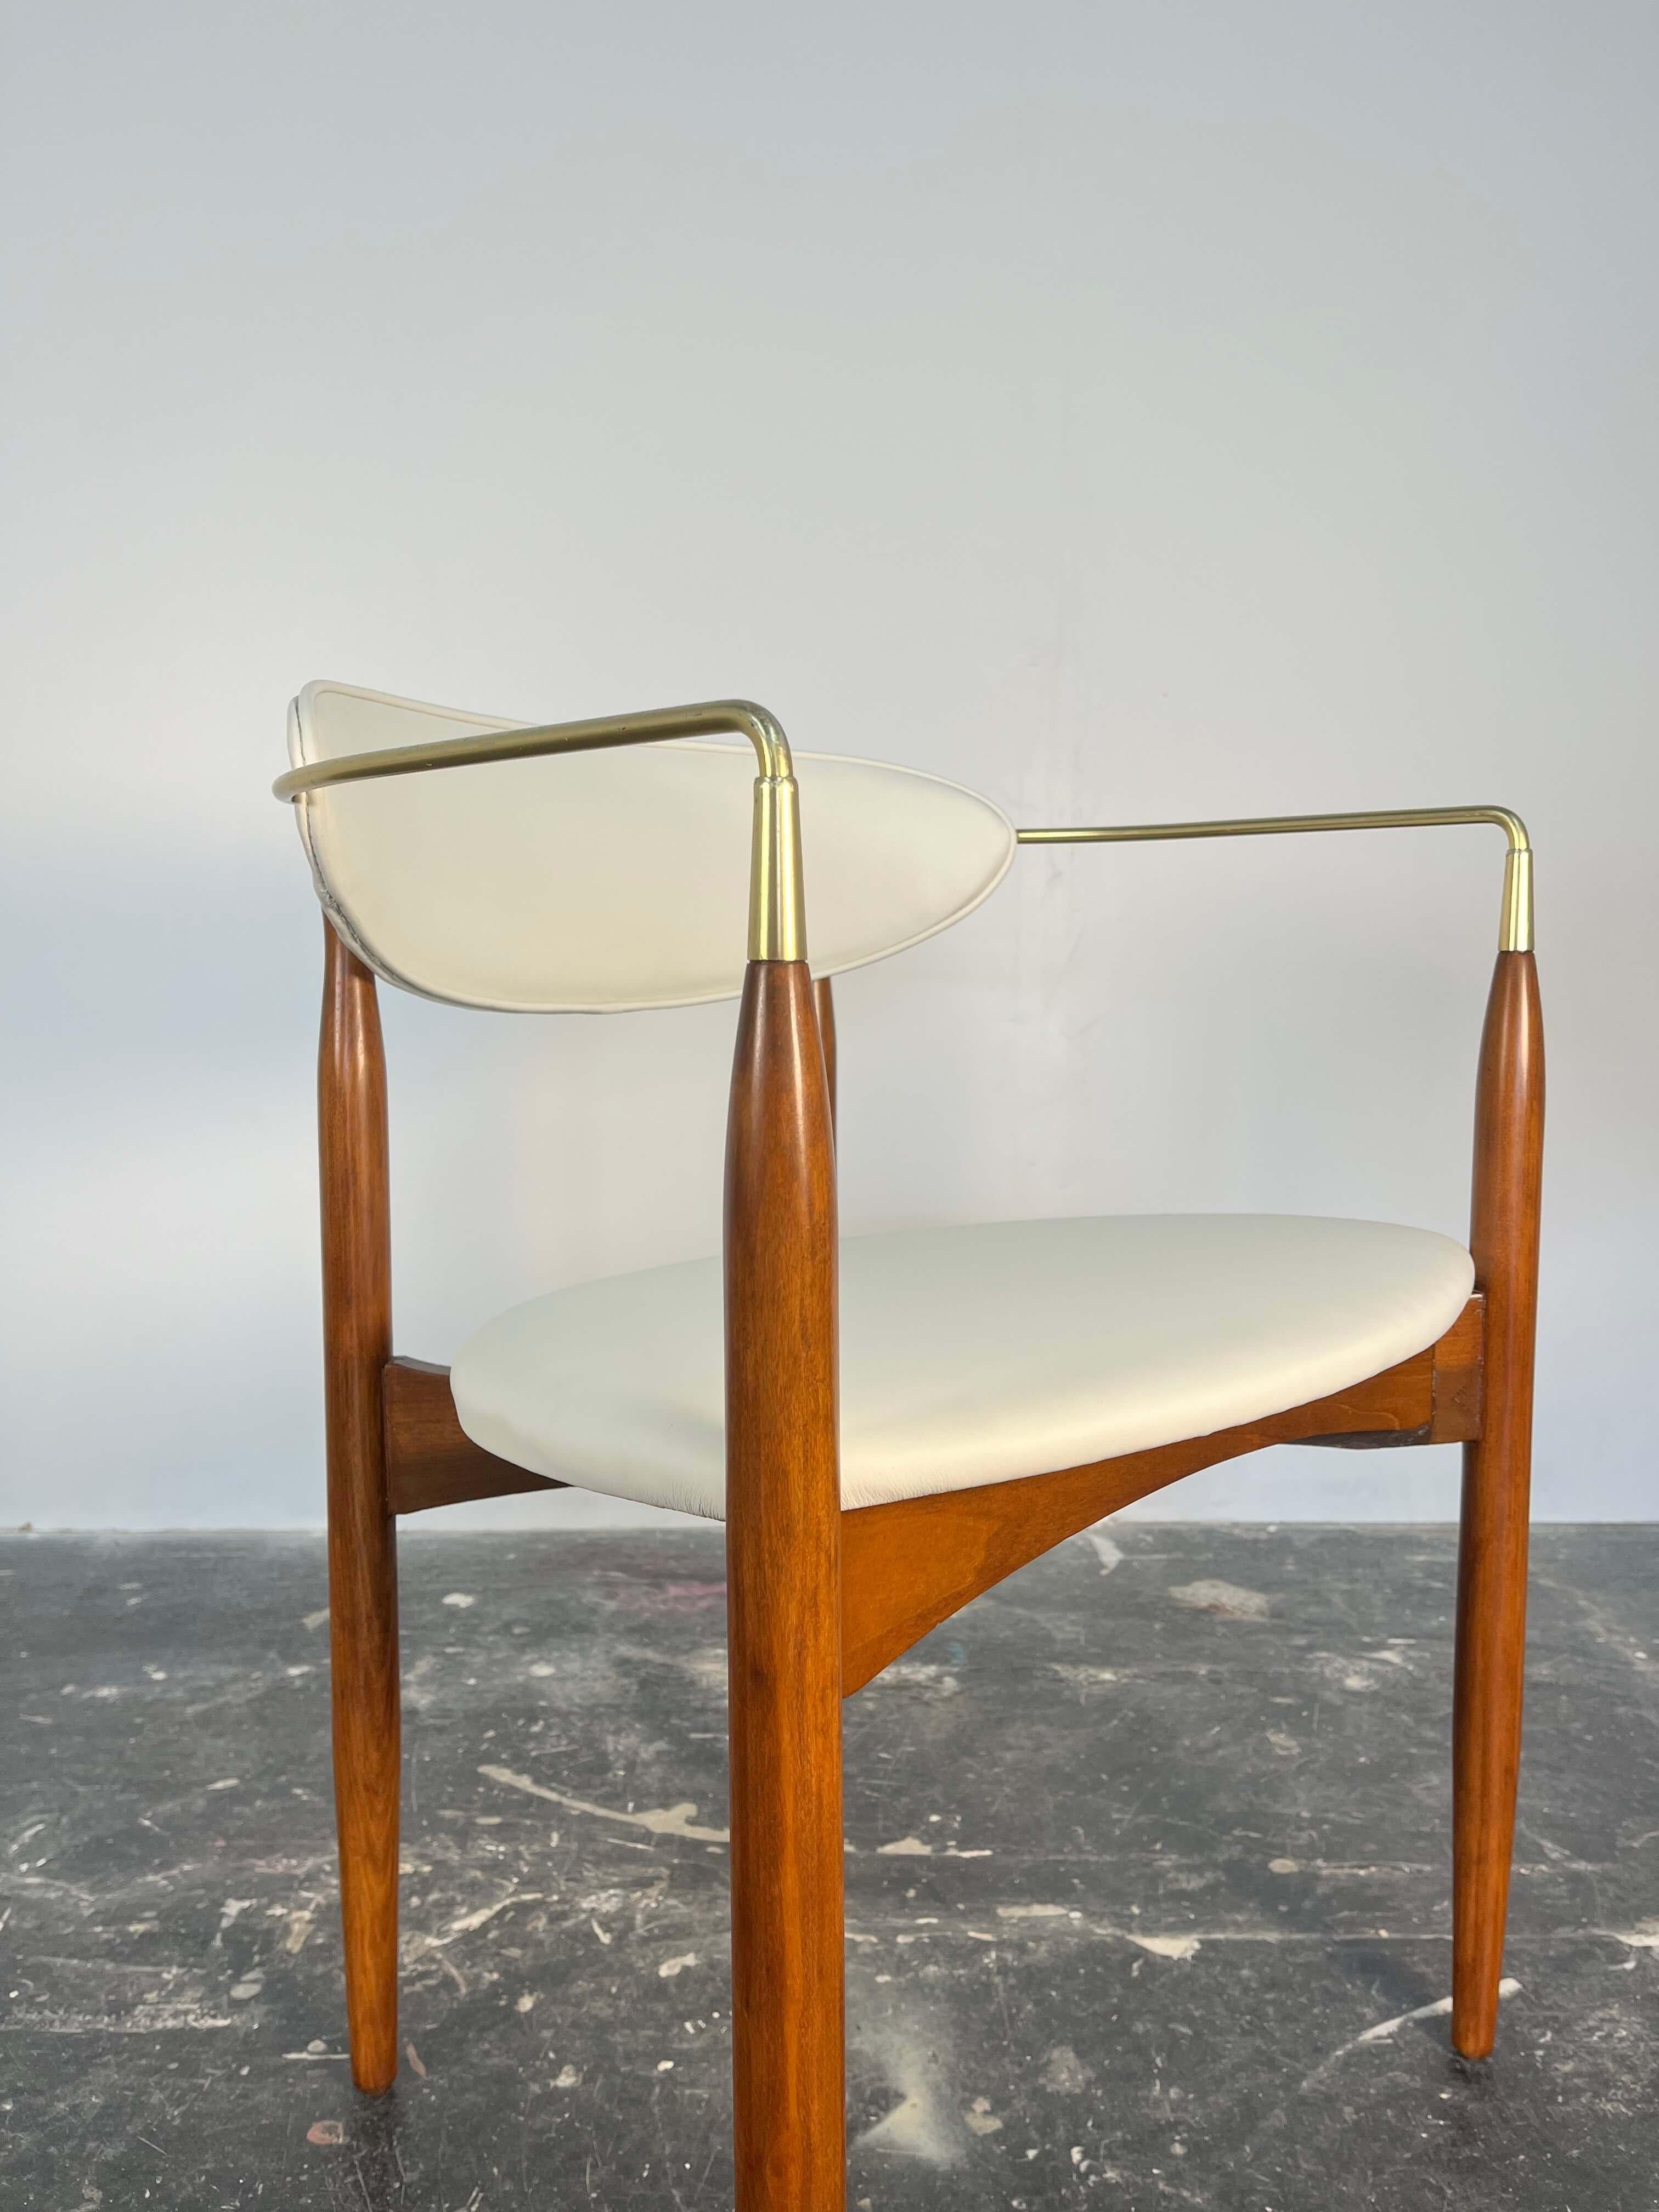 This is a gorgeous set of 4 dining chairs which were designed by Dan Johnson for Selig. Dramatic and curvilinear form, these chairs have the sweeping arms made of solid brass. Elegant tapered legs are finely carved from beech wood stained in a